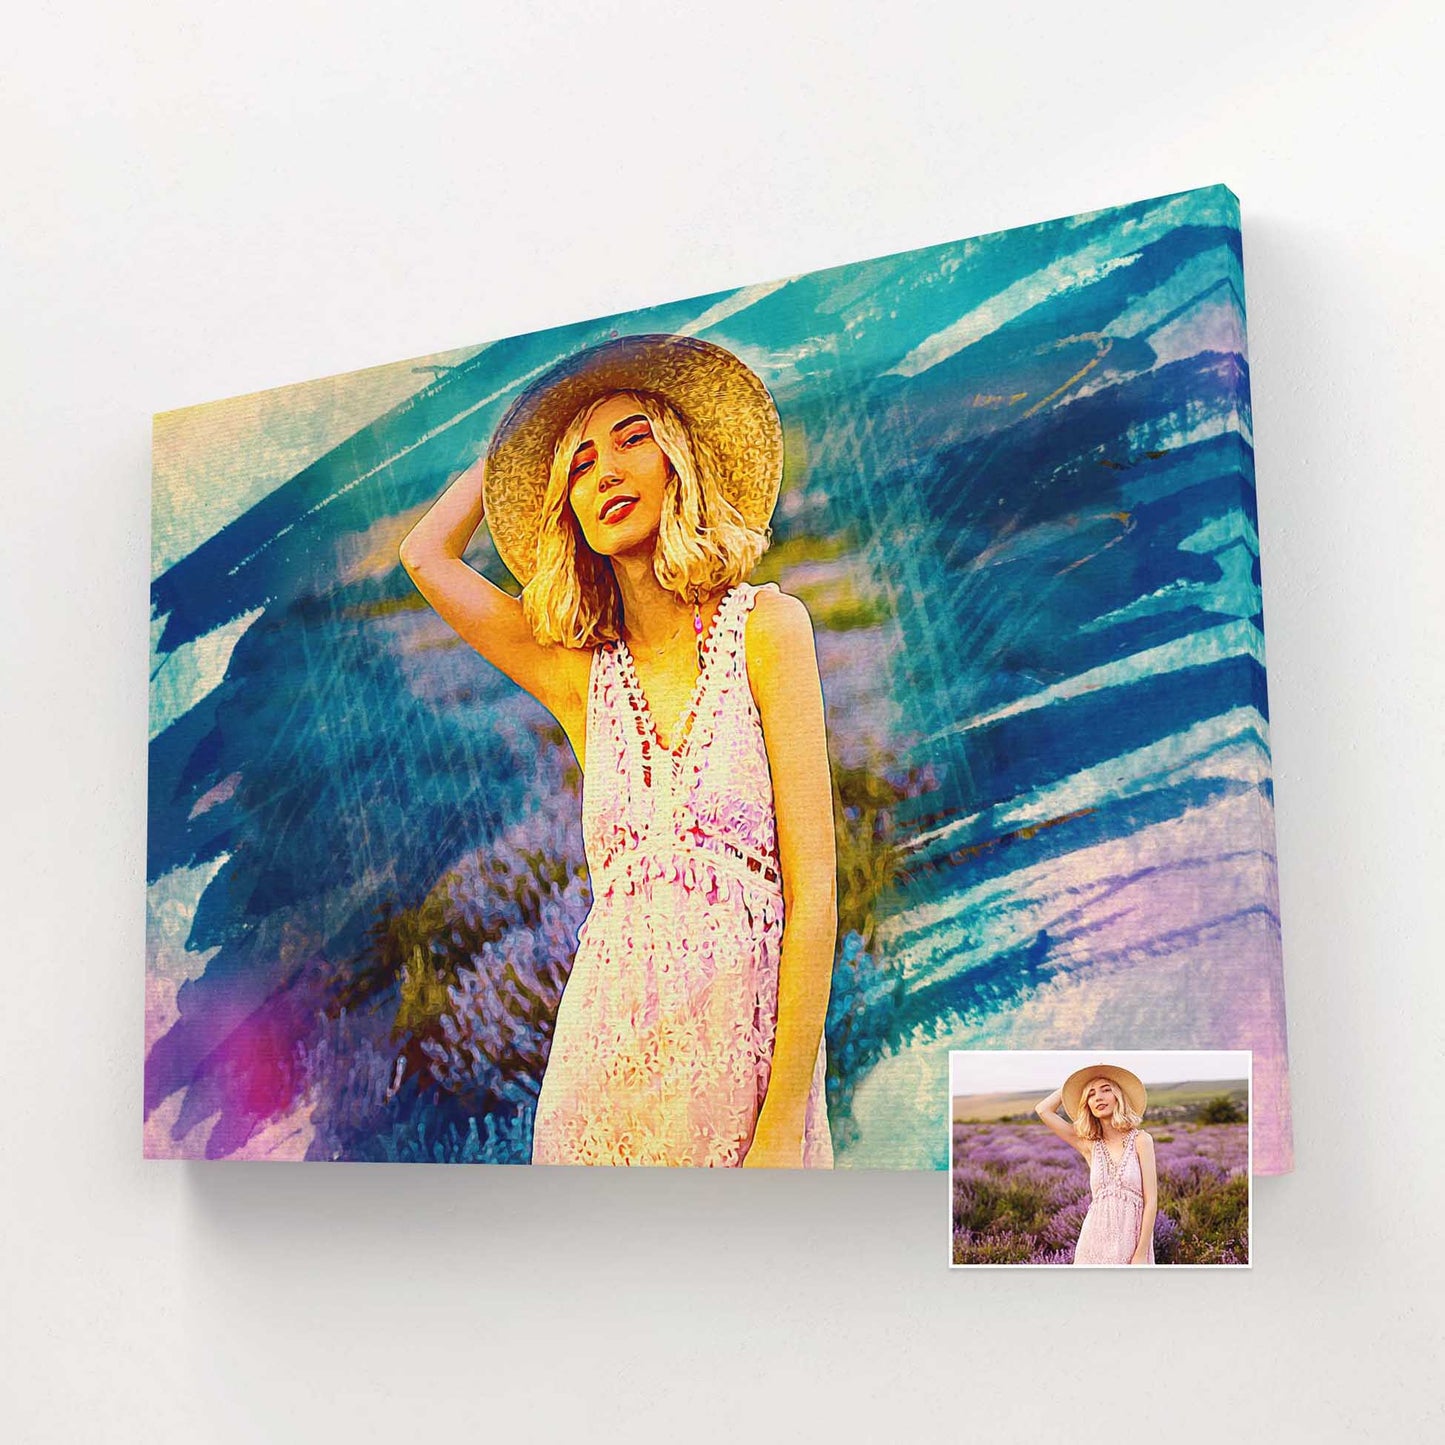 Our Personalised Artistic Painting Canvas is a unique and vibrant gift for friends, family, and loved ones